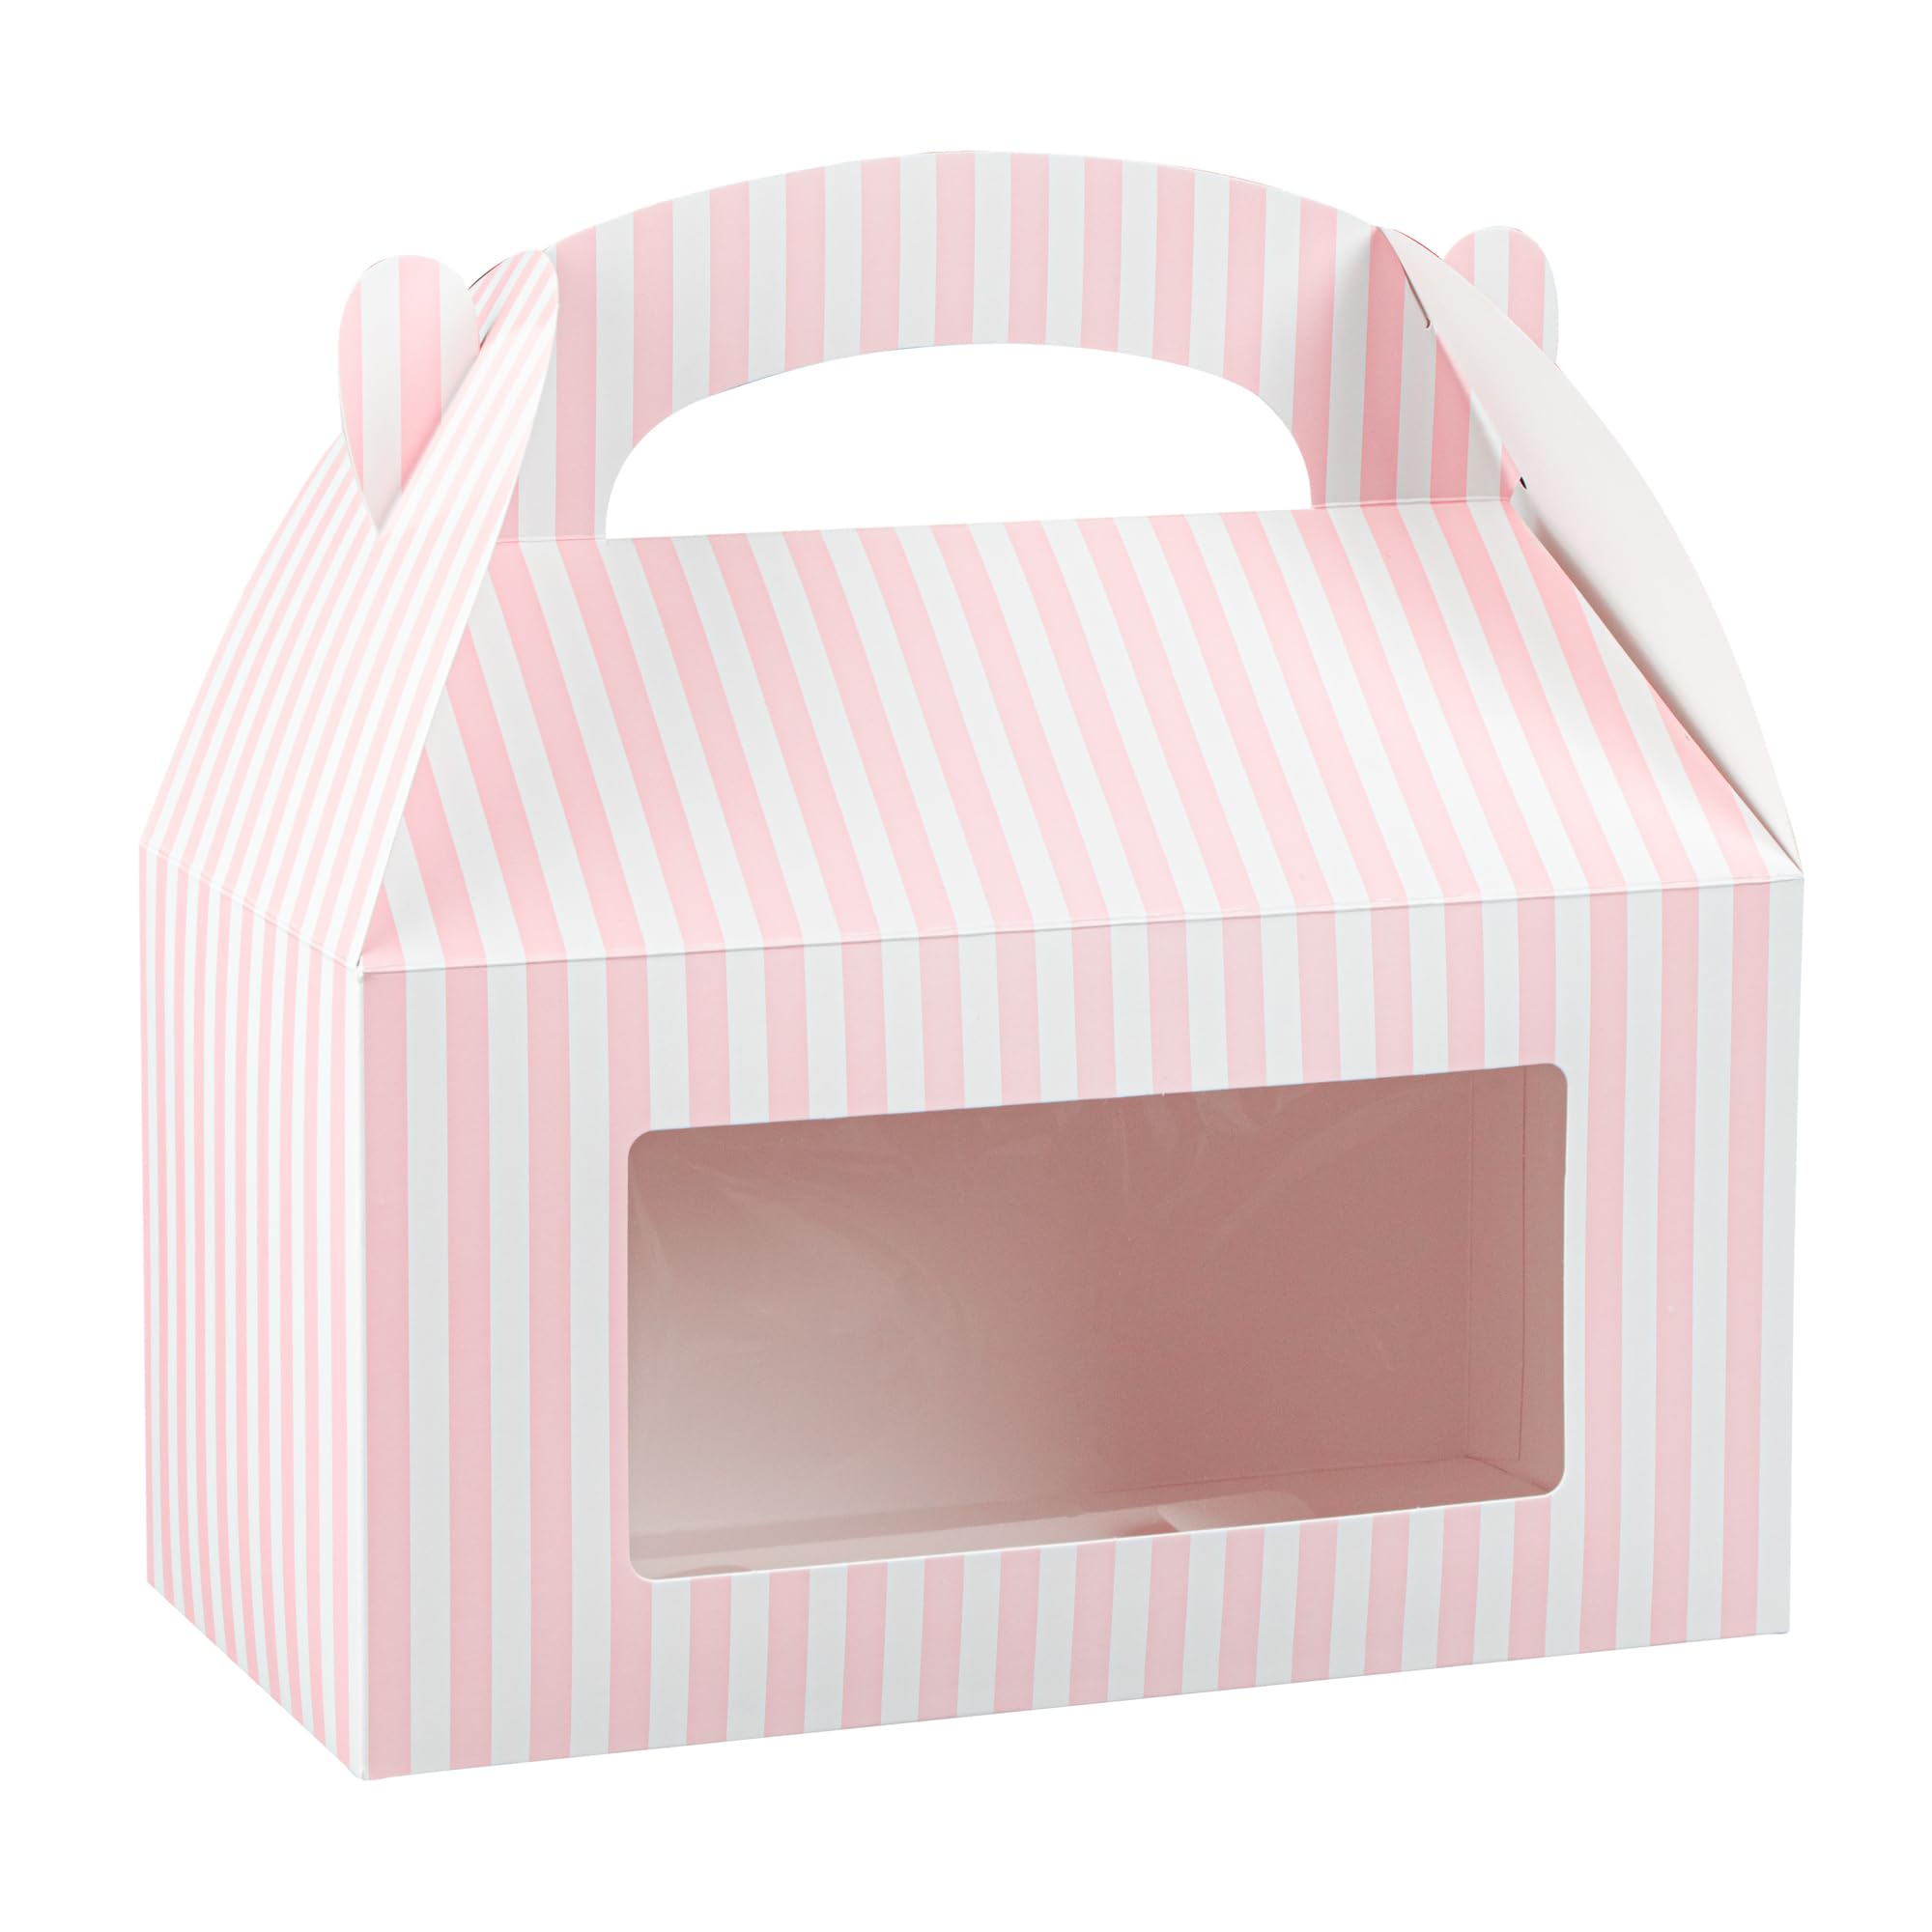 Bio Tek 9.5 x 5 x 5 Inch Gable Boxes For Party Favors, 25 Durable Gift Treat Boxes - Striped Pattern, Clear PET Window, Pink & White Paper Barn Boxes, With Built-In Handle - Restaurantware